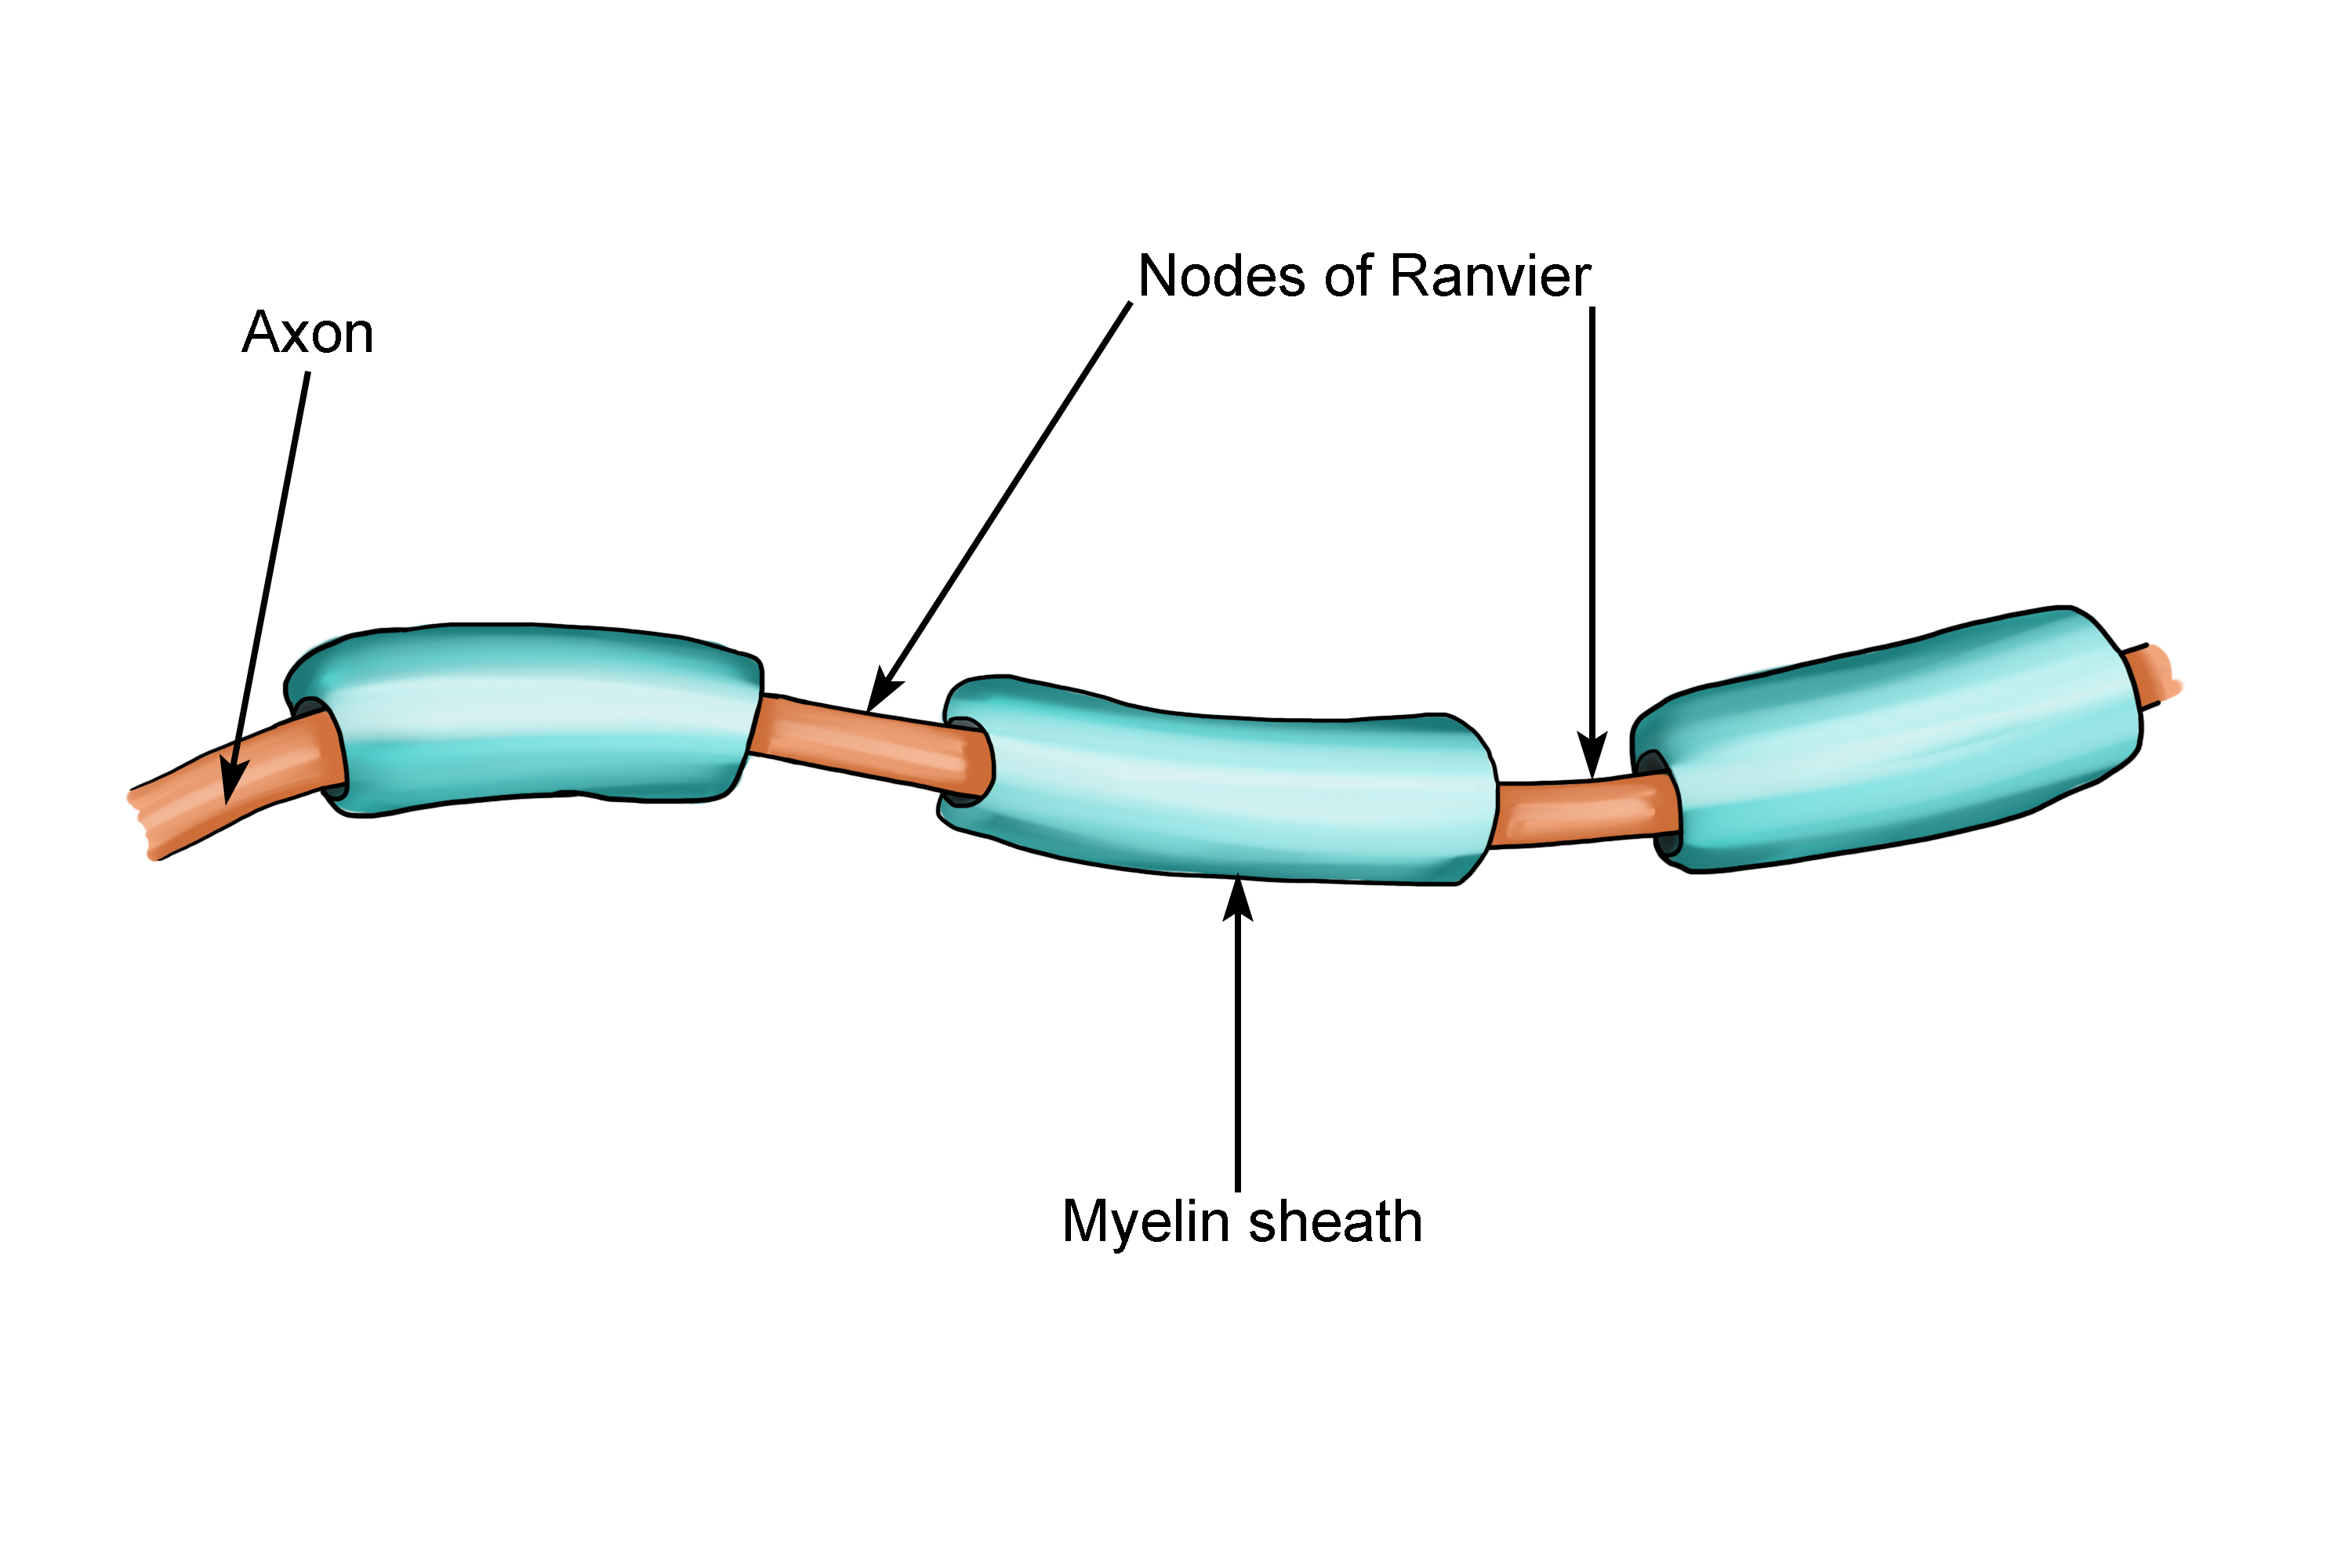 Diagram showing the consecutive gaps of Ranvier and the myelin sheath